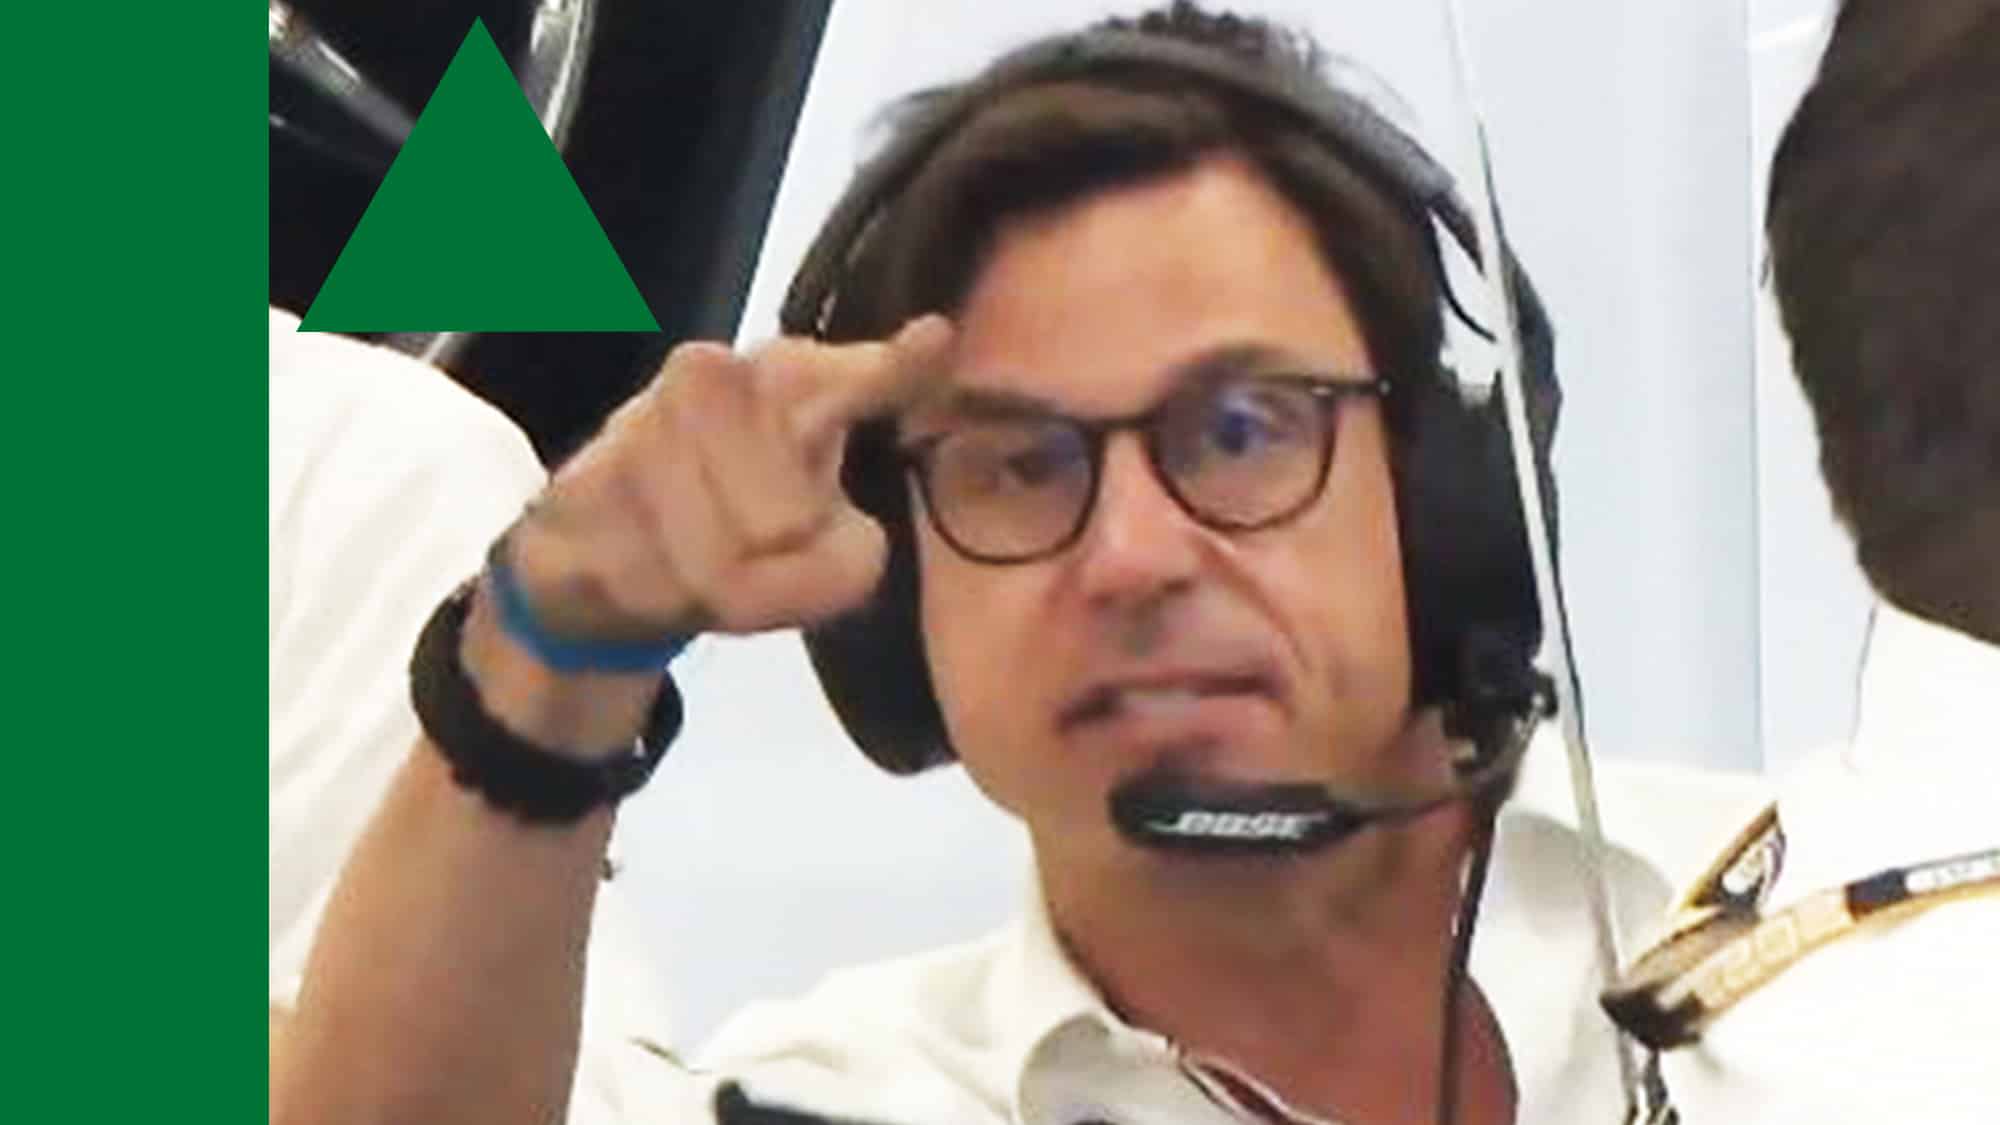 Going up Toto Wolff meme